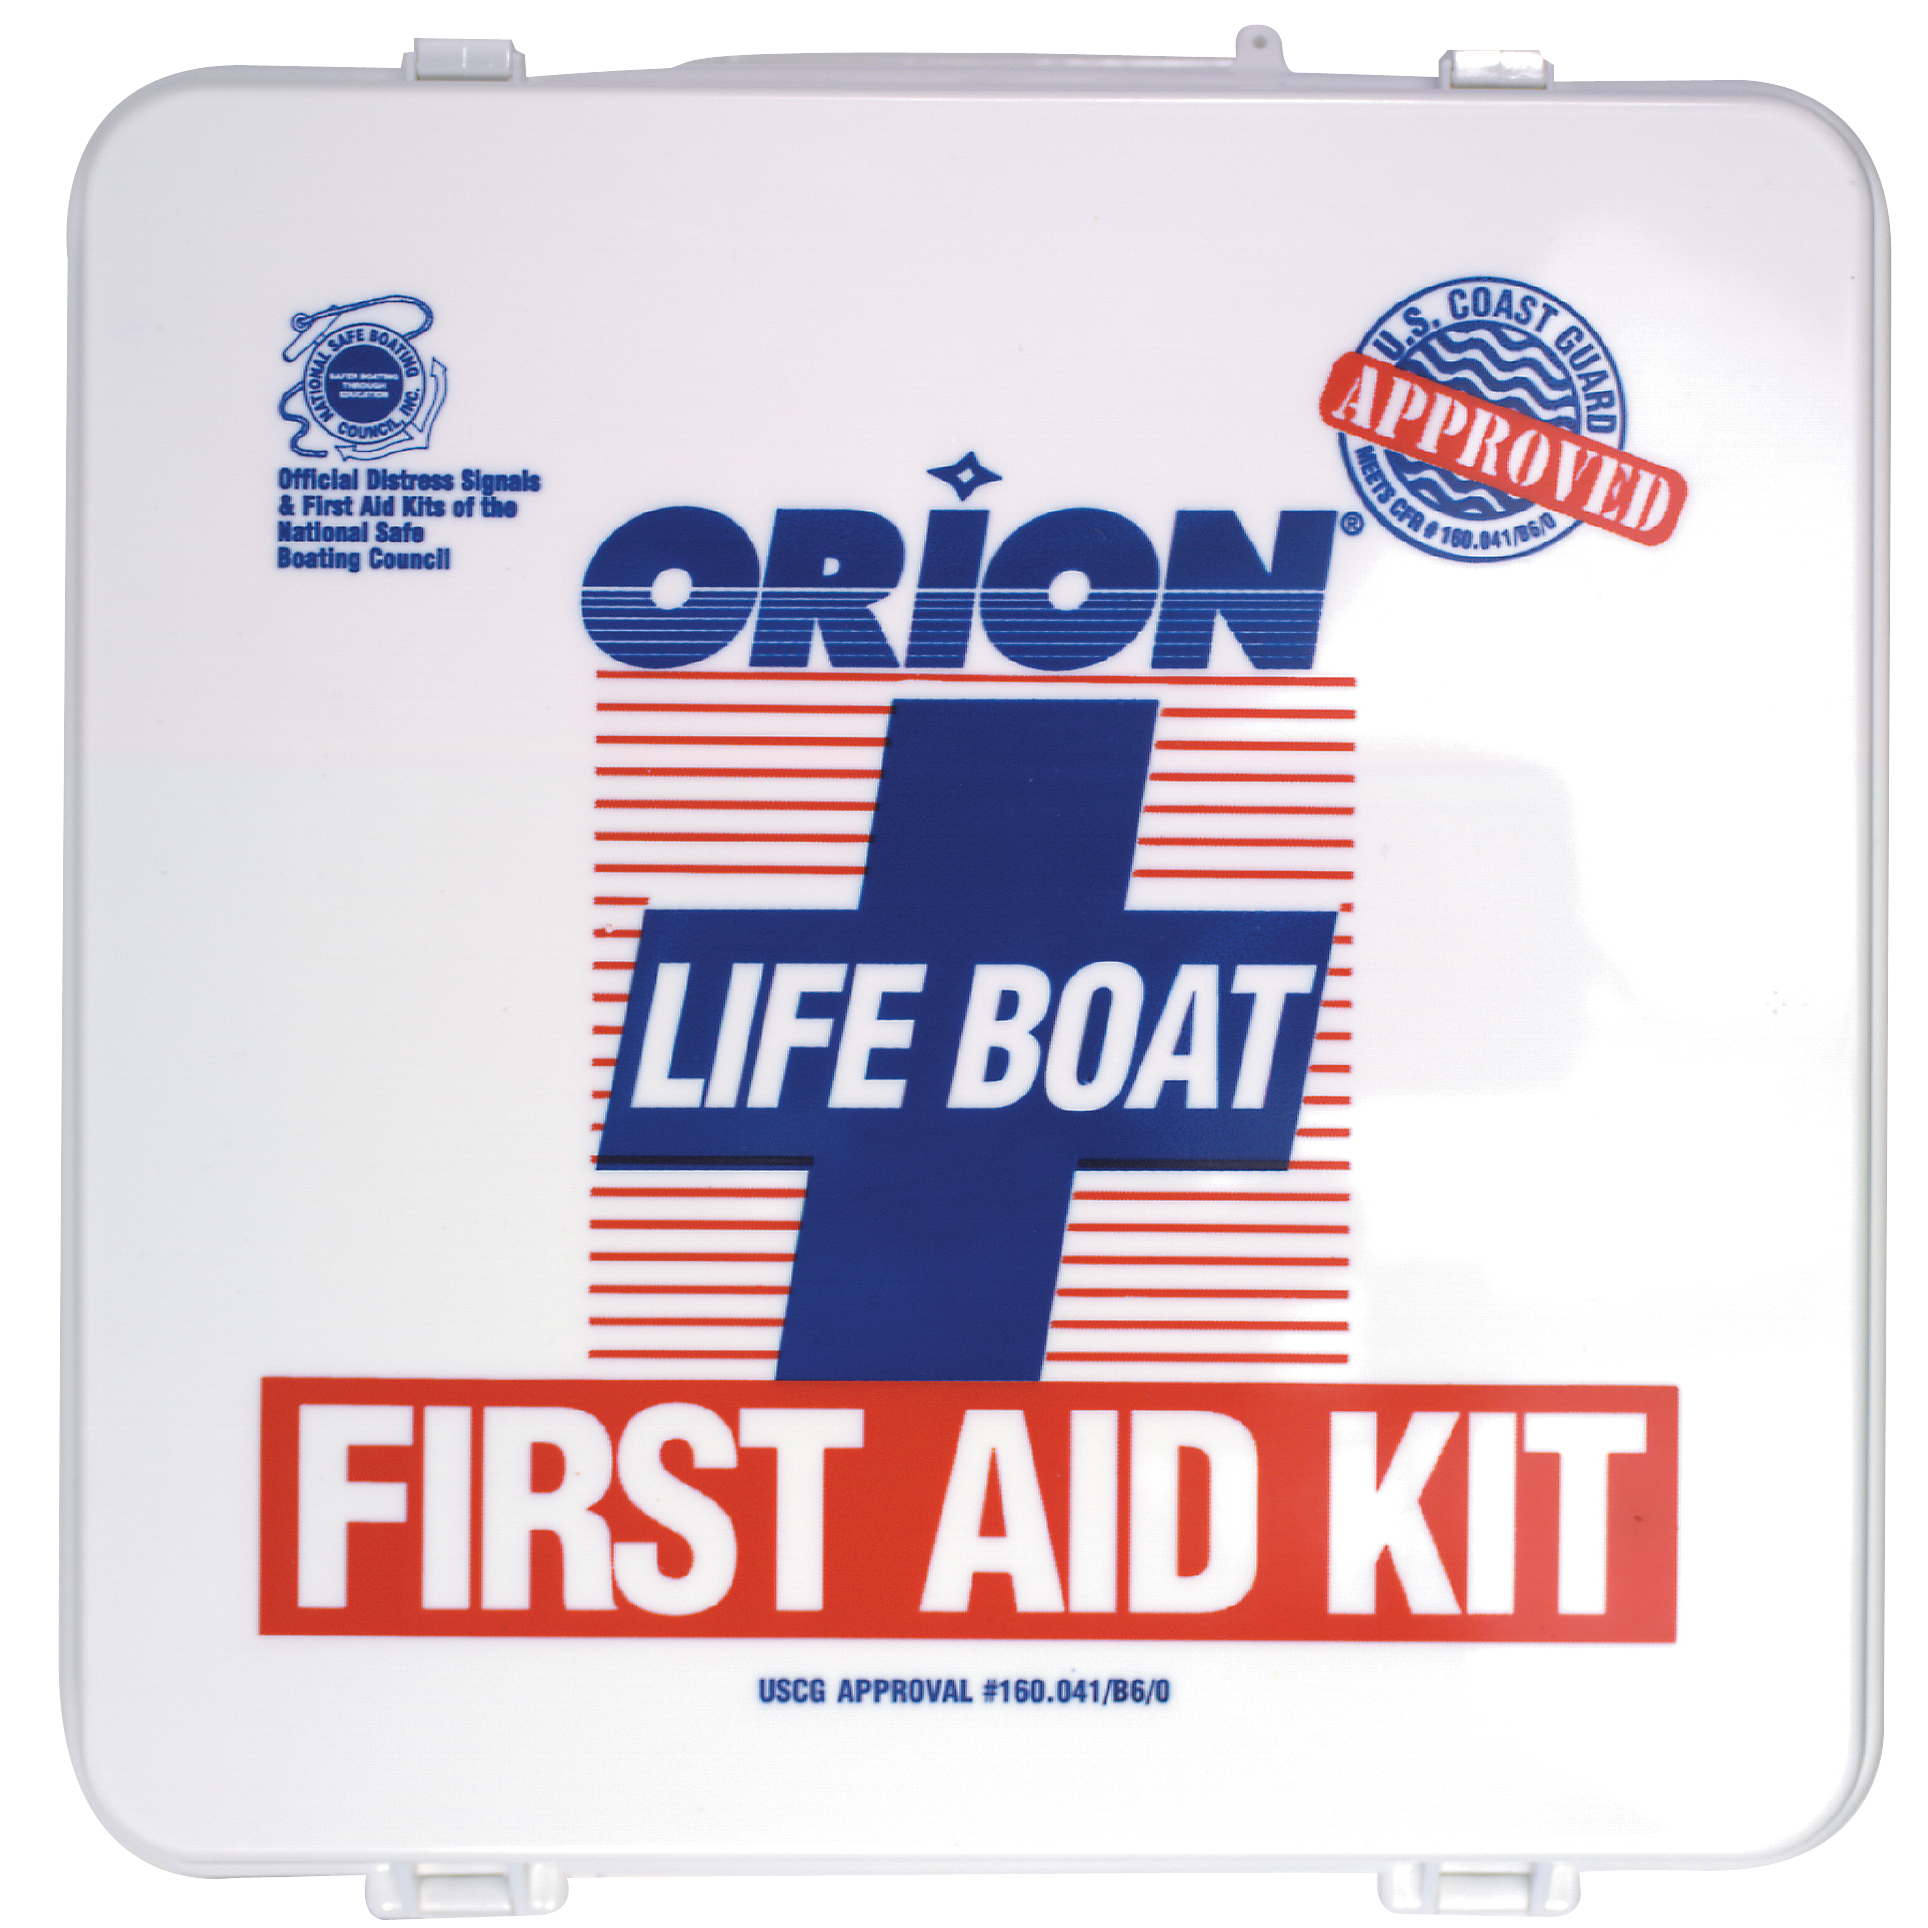 LIFE BOAT FIRST AID KIT MEETS USCG